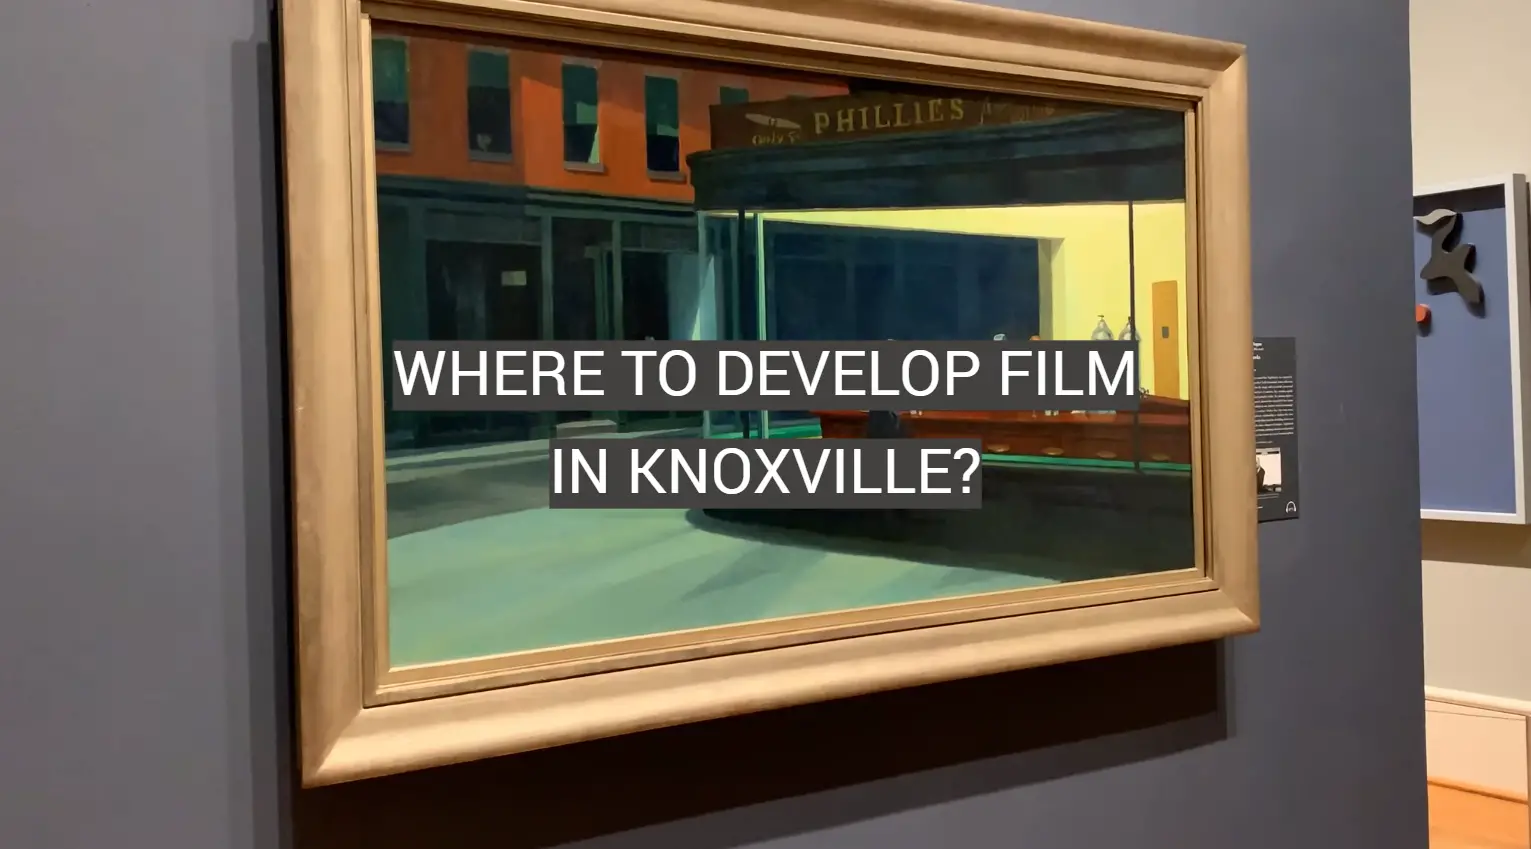 Where to Develop Film in Knoxville?